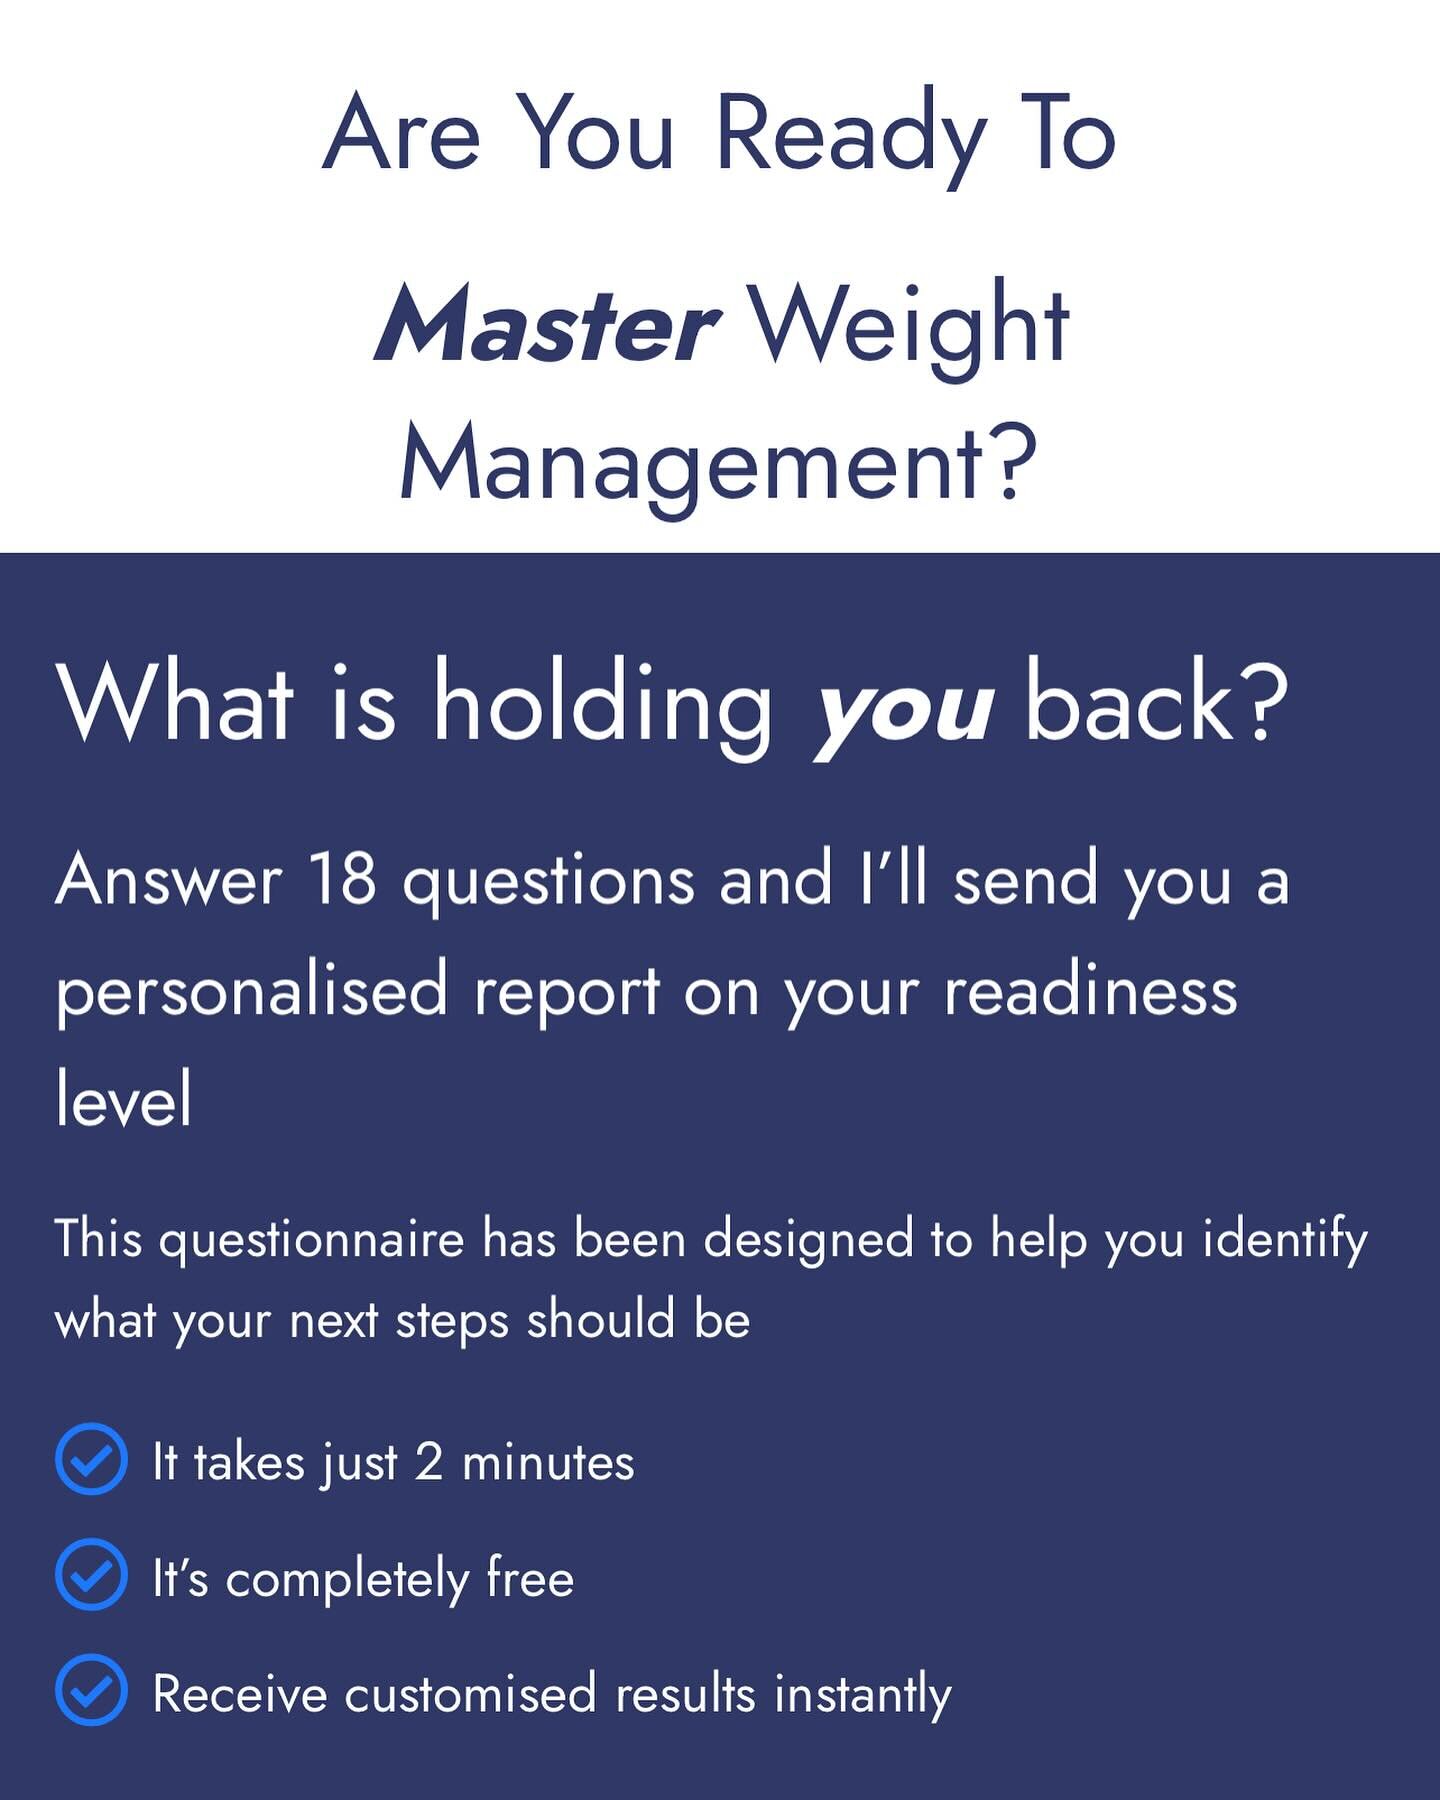 ✅ What is your level of &lsquo;readiness&rsquo; to master long term weight management and achieve permanent weight loss?

✅ Identify your areas of strengths and highlight gaps to work on

✅ 18 questions - receive results instantly

Link in bio! 🔗 

